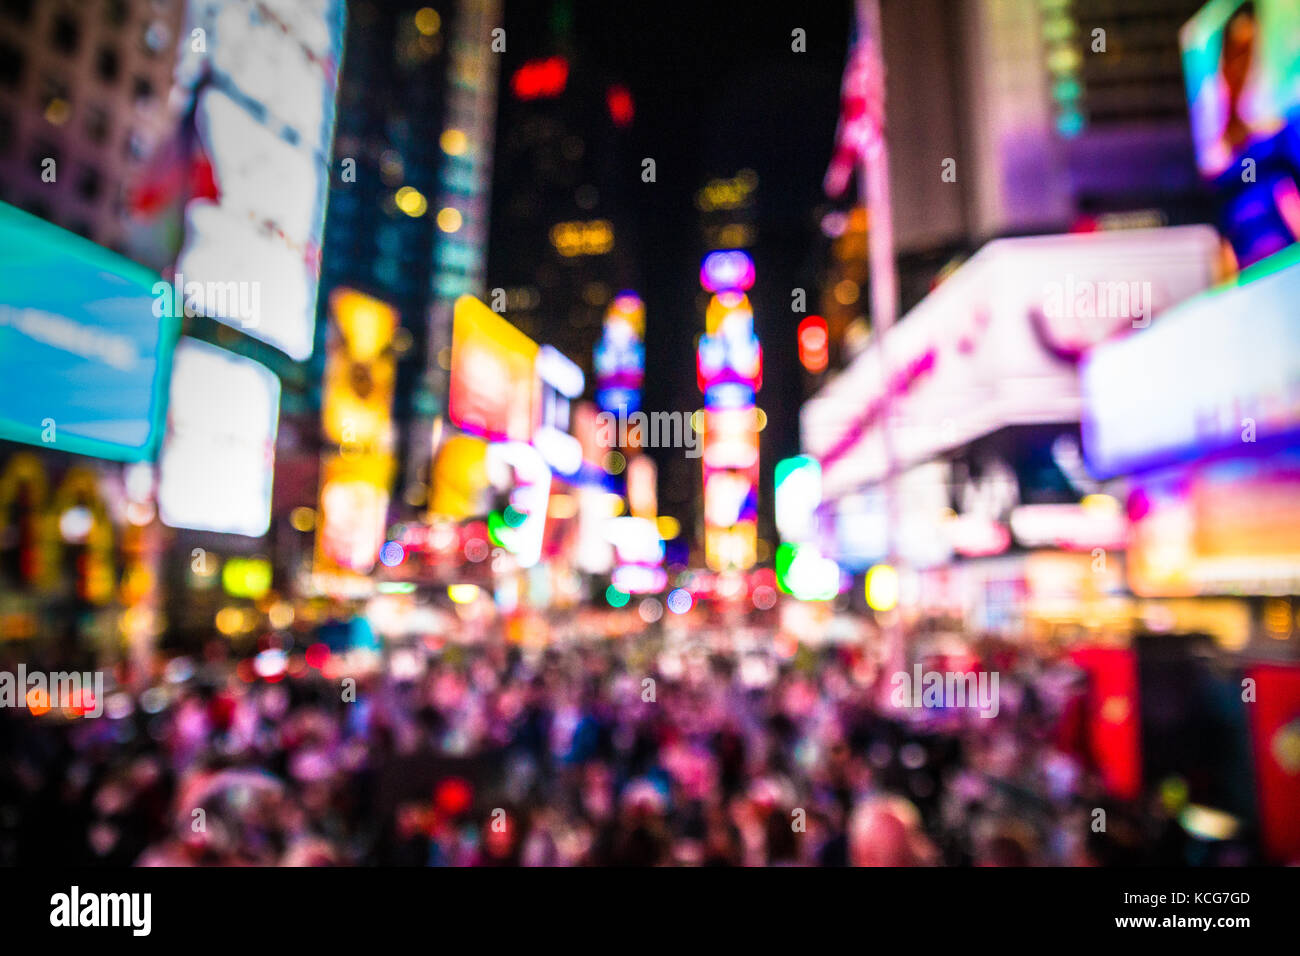 Defocused blur of Times Square in New York City, midtown Manhattan at night with lights and people. Stock Photo